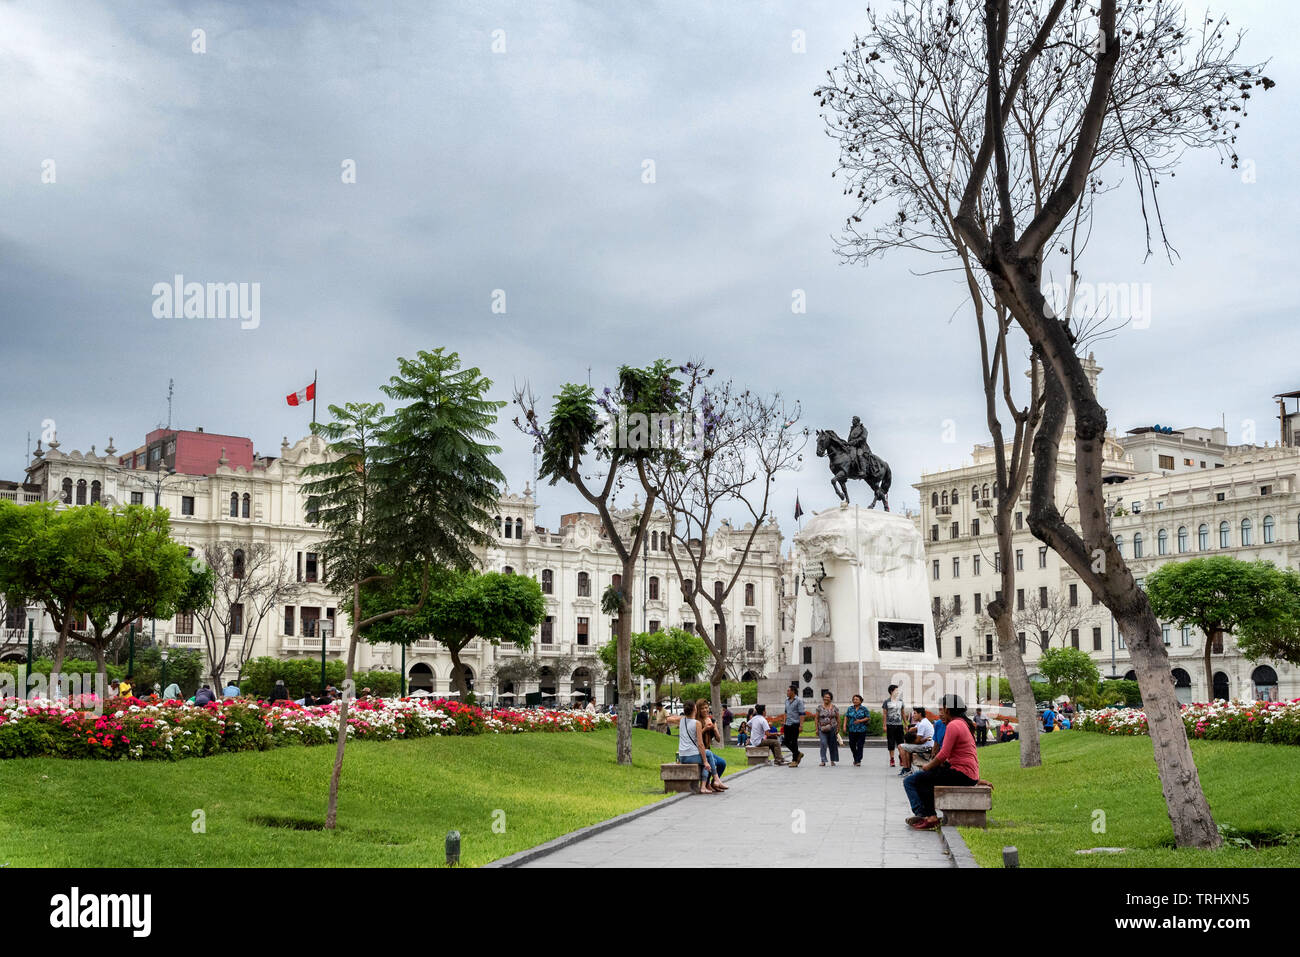 LIMA, PERU - JAN 21: Plaza San Martin in Lima, Peru, on January 21, 2017. The plaza is at the heart of the city's historic center. Stock Photo